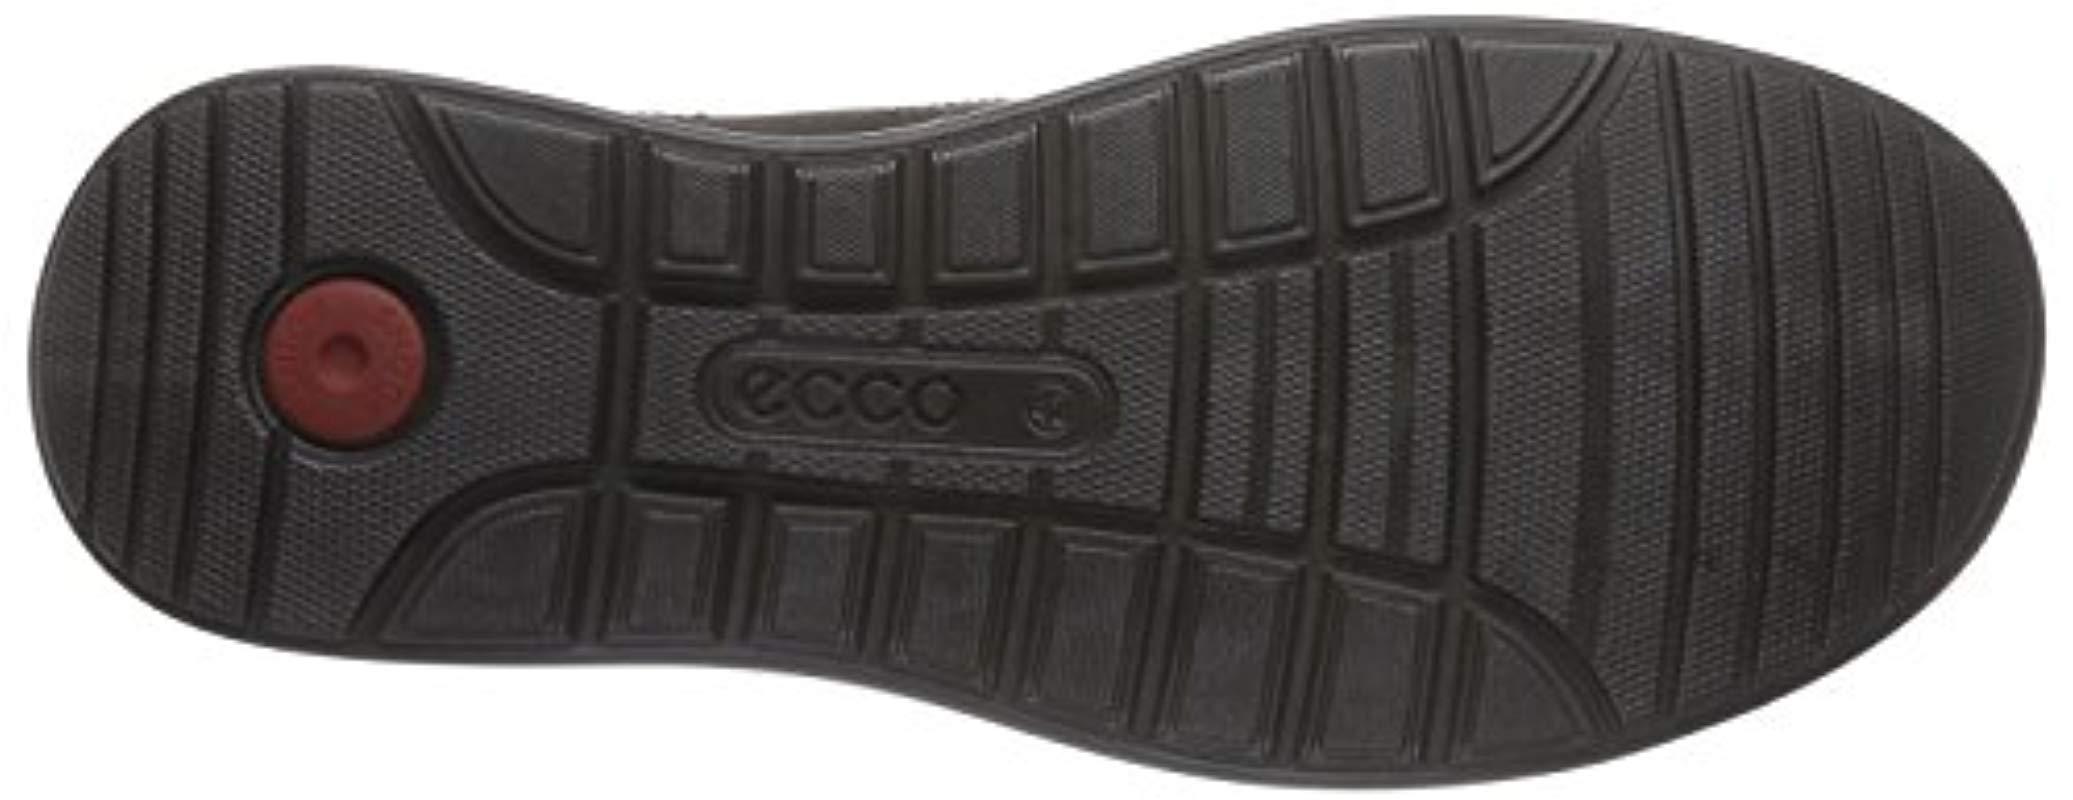 ecco howell derby